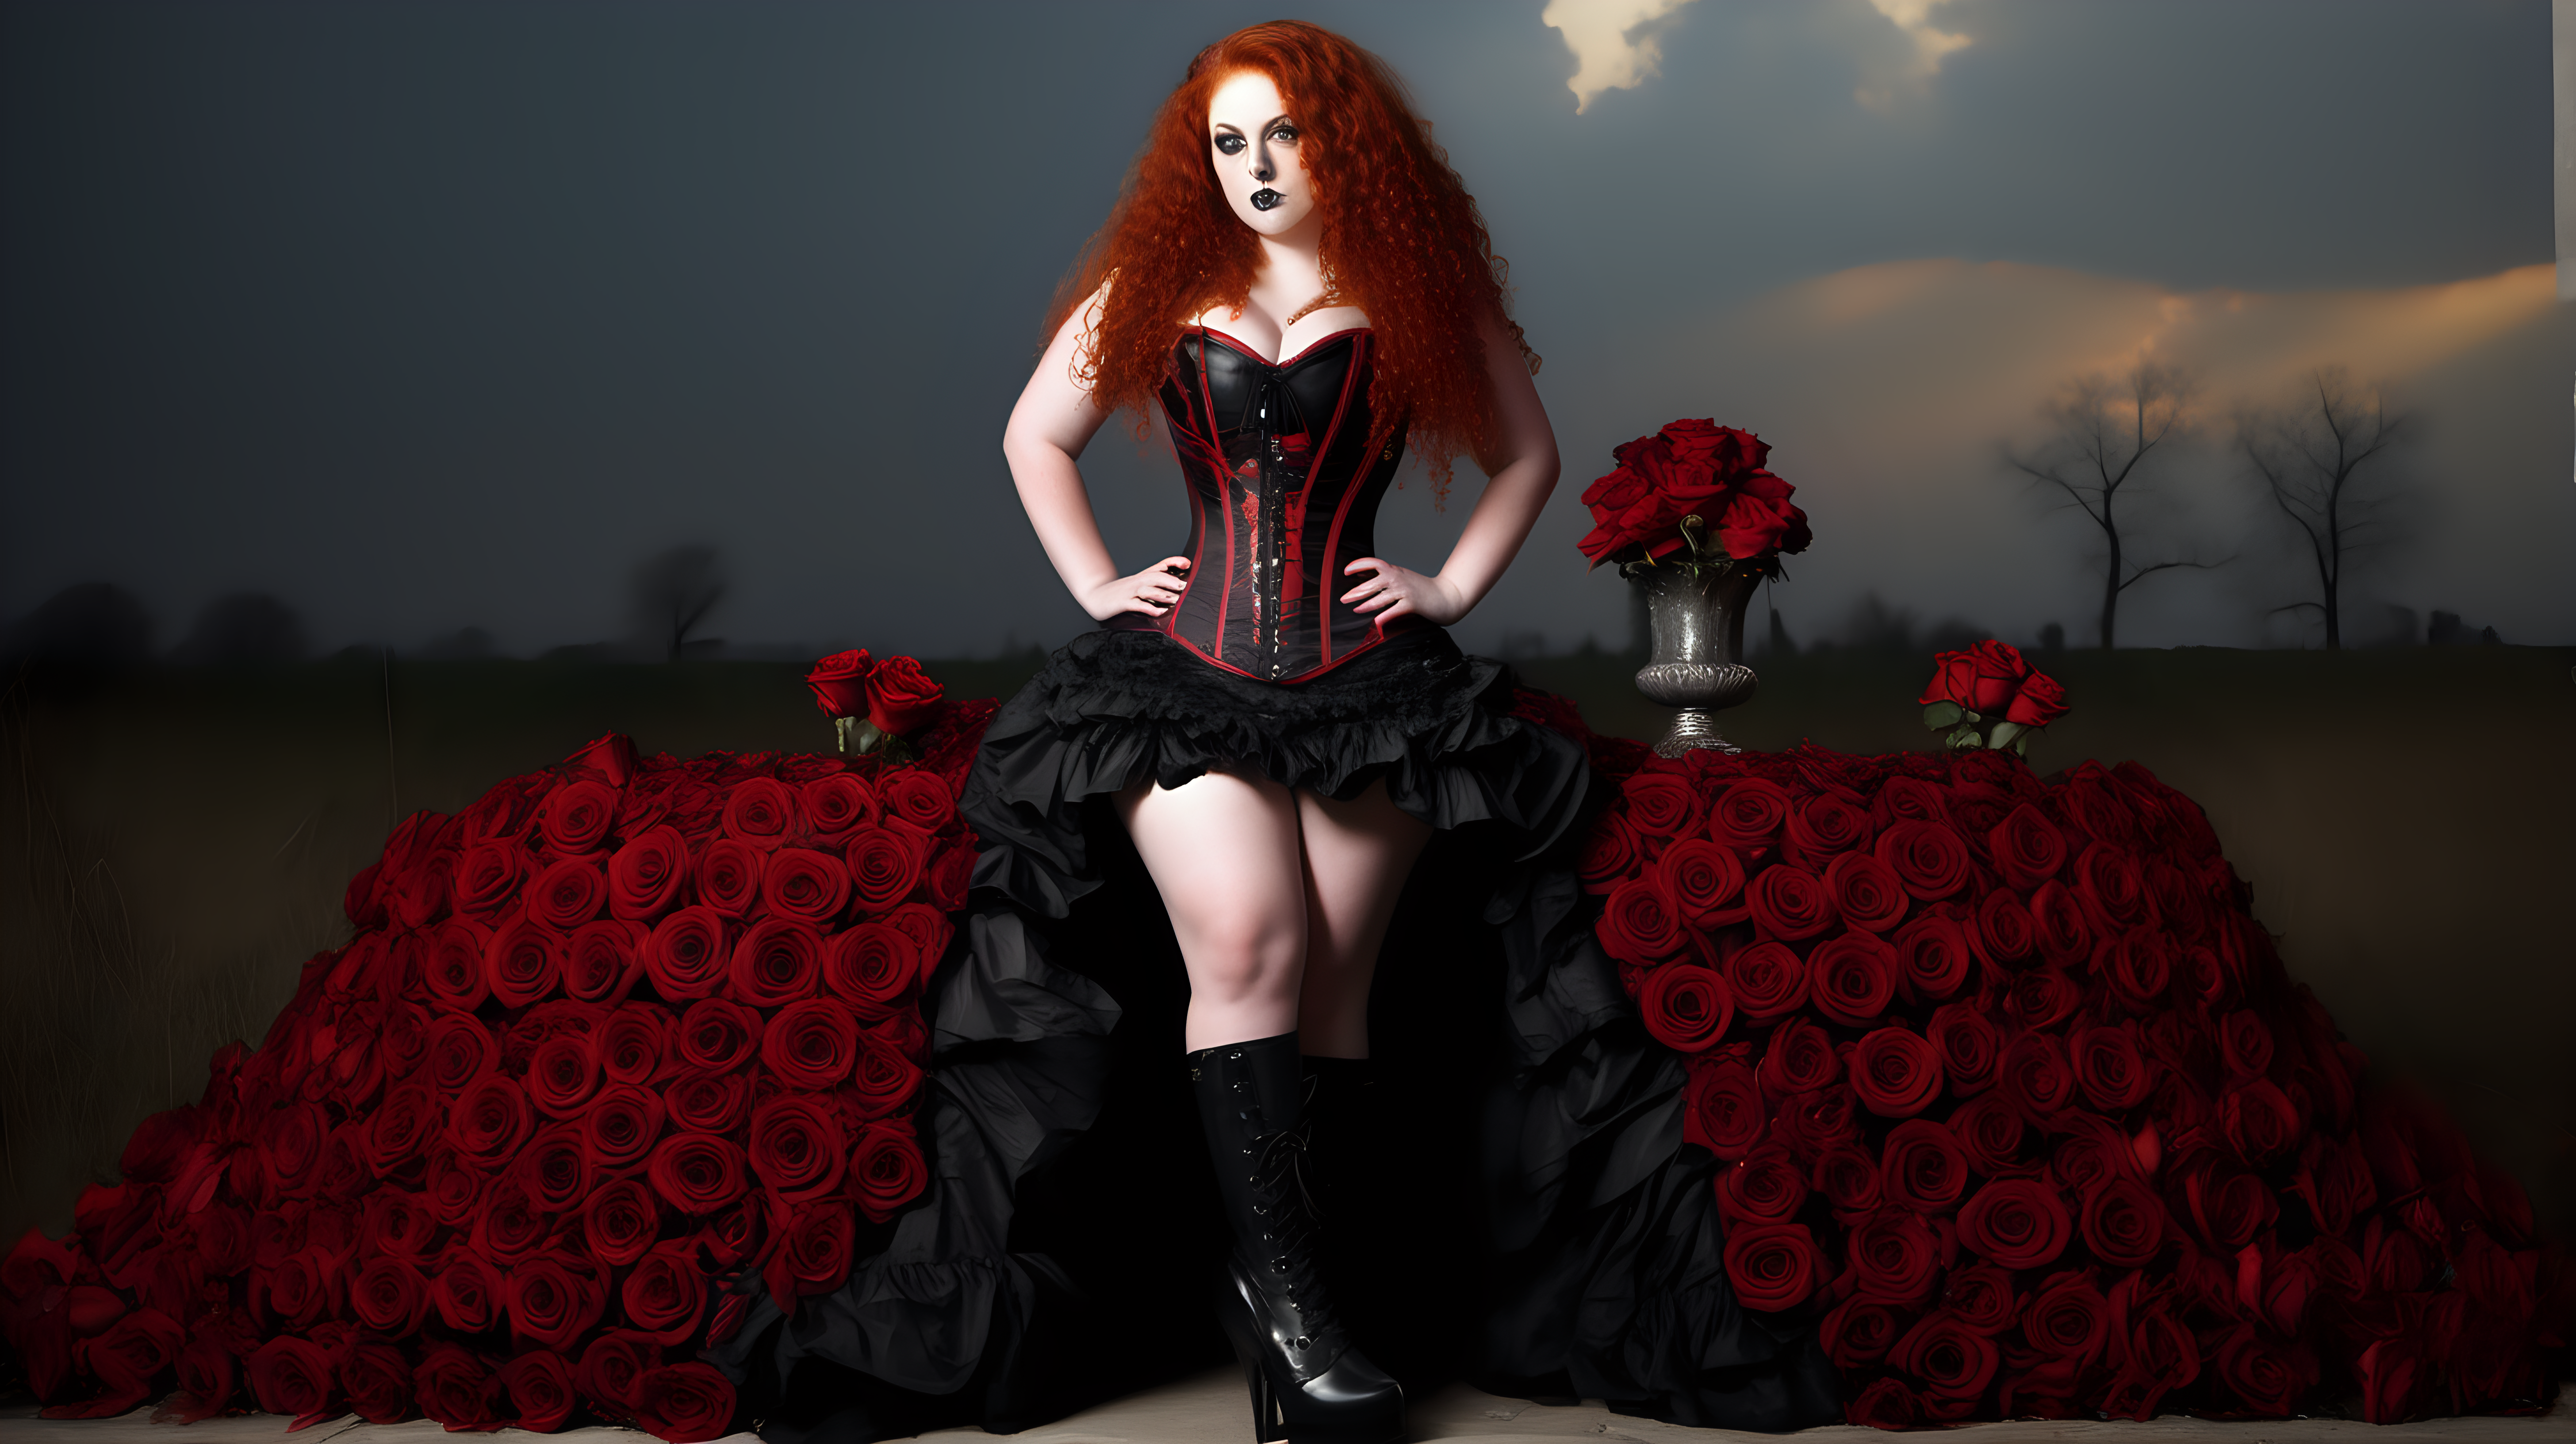 SLR quality. 30 yr old woman. 5ft tall size 18 clothes. Long red curly hair. Black and red corset dress. Plus size. Black high heel boots. Fire skulls roses